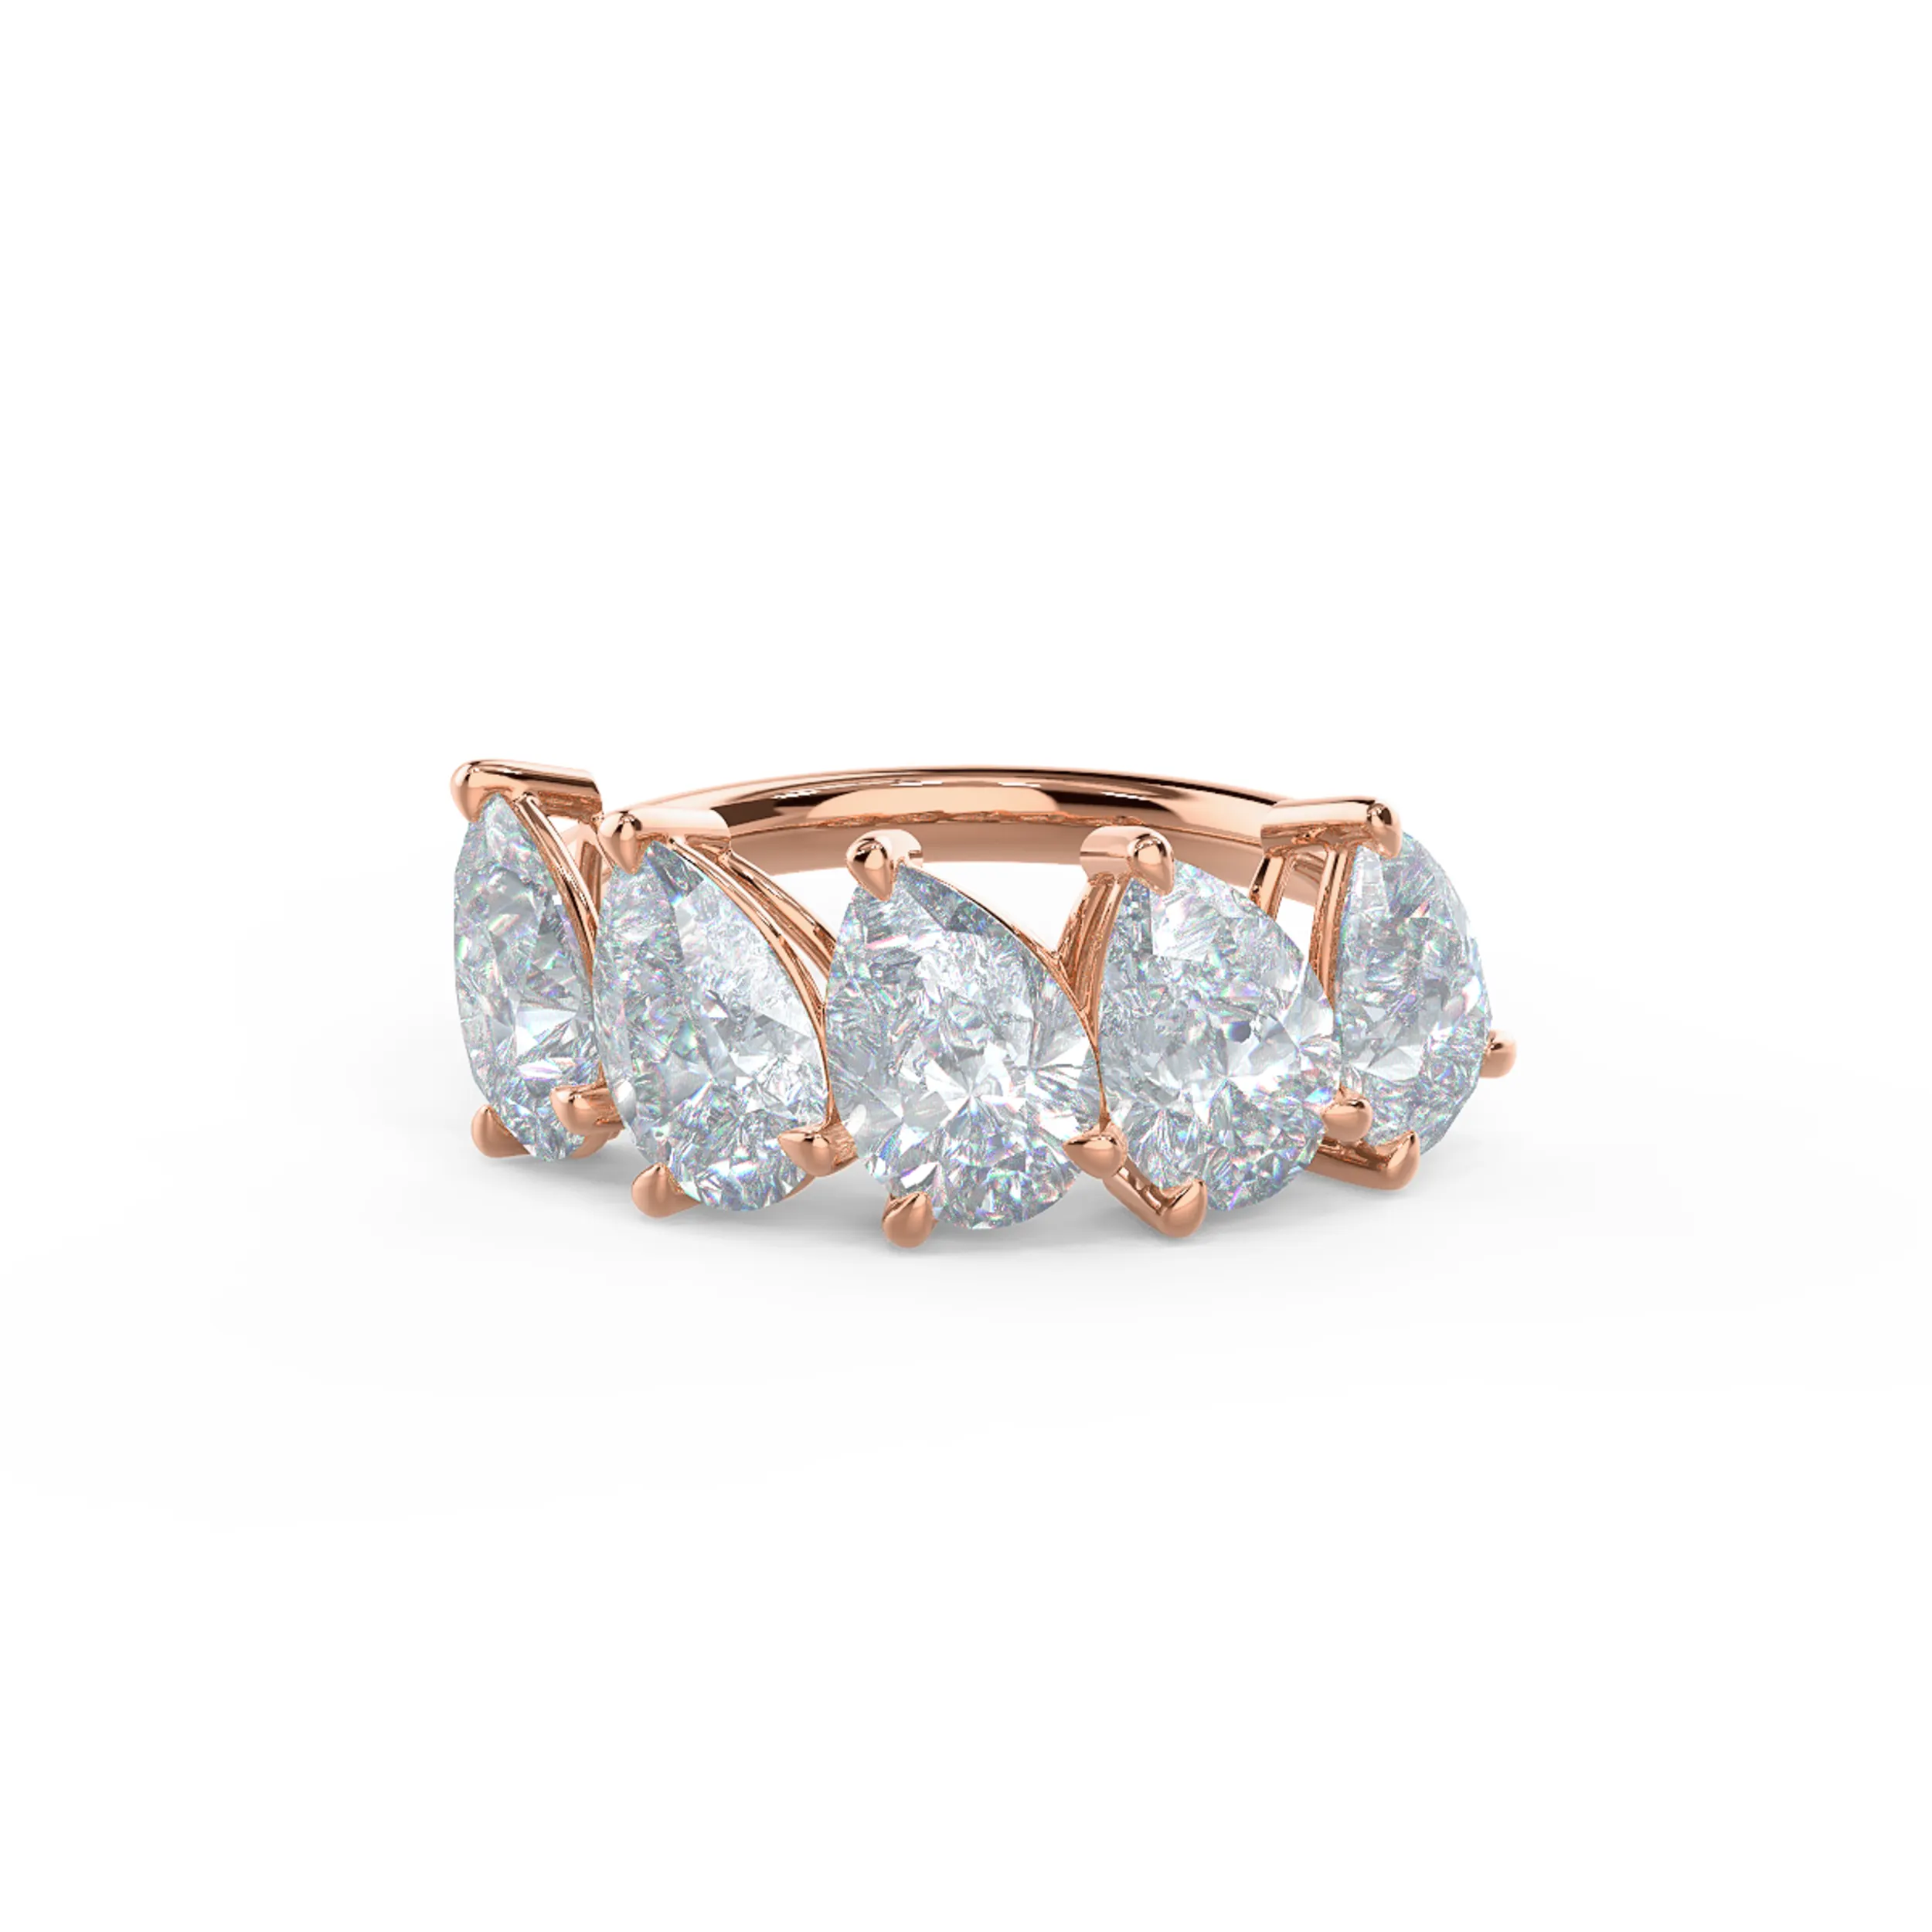 Exceptional Quality 3.5 Carat Diamonds set in 14k Rose Gold Pear Angled Five Stone (Main View)